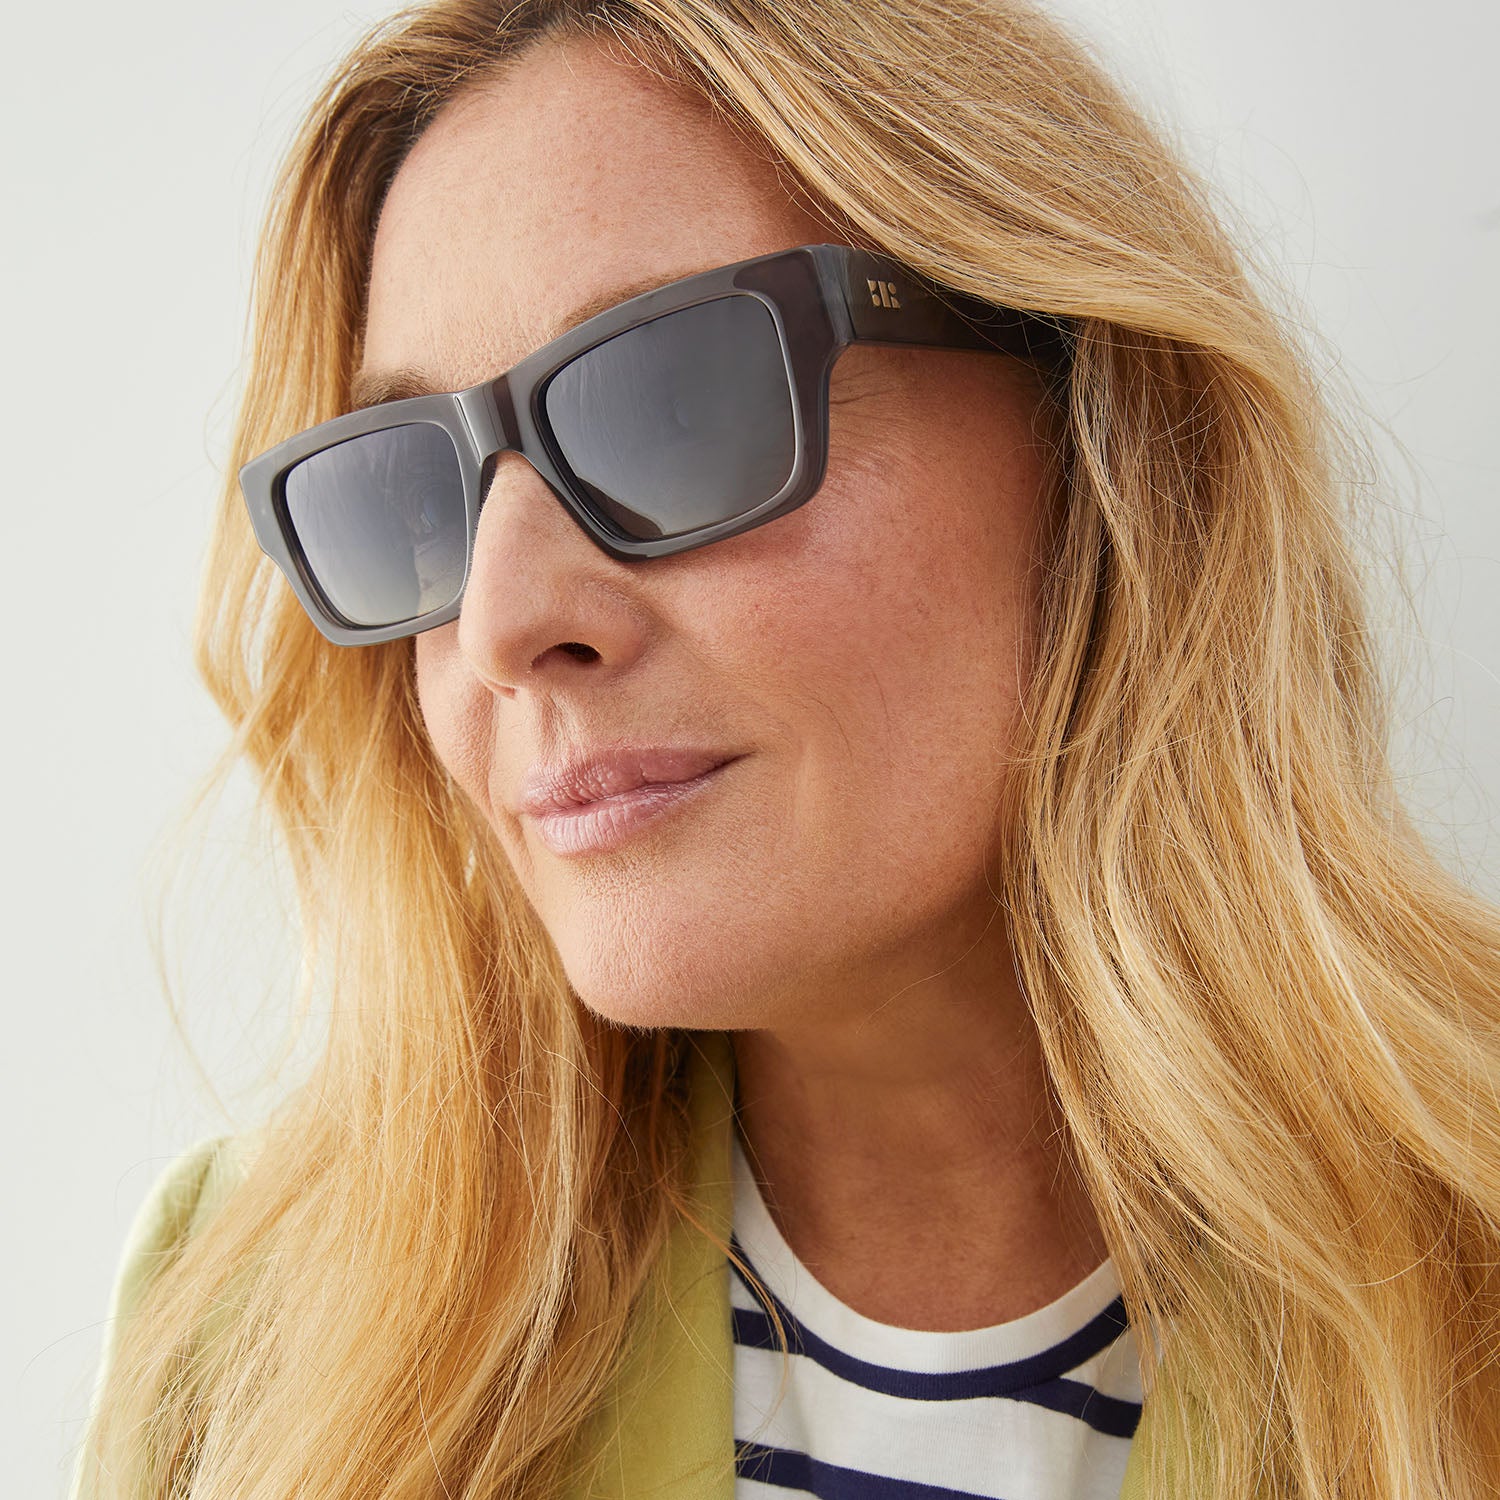 Photo of a man or woman wearing Aimé Sun Clear Blue Sun Glasses by French Kiwis